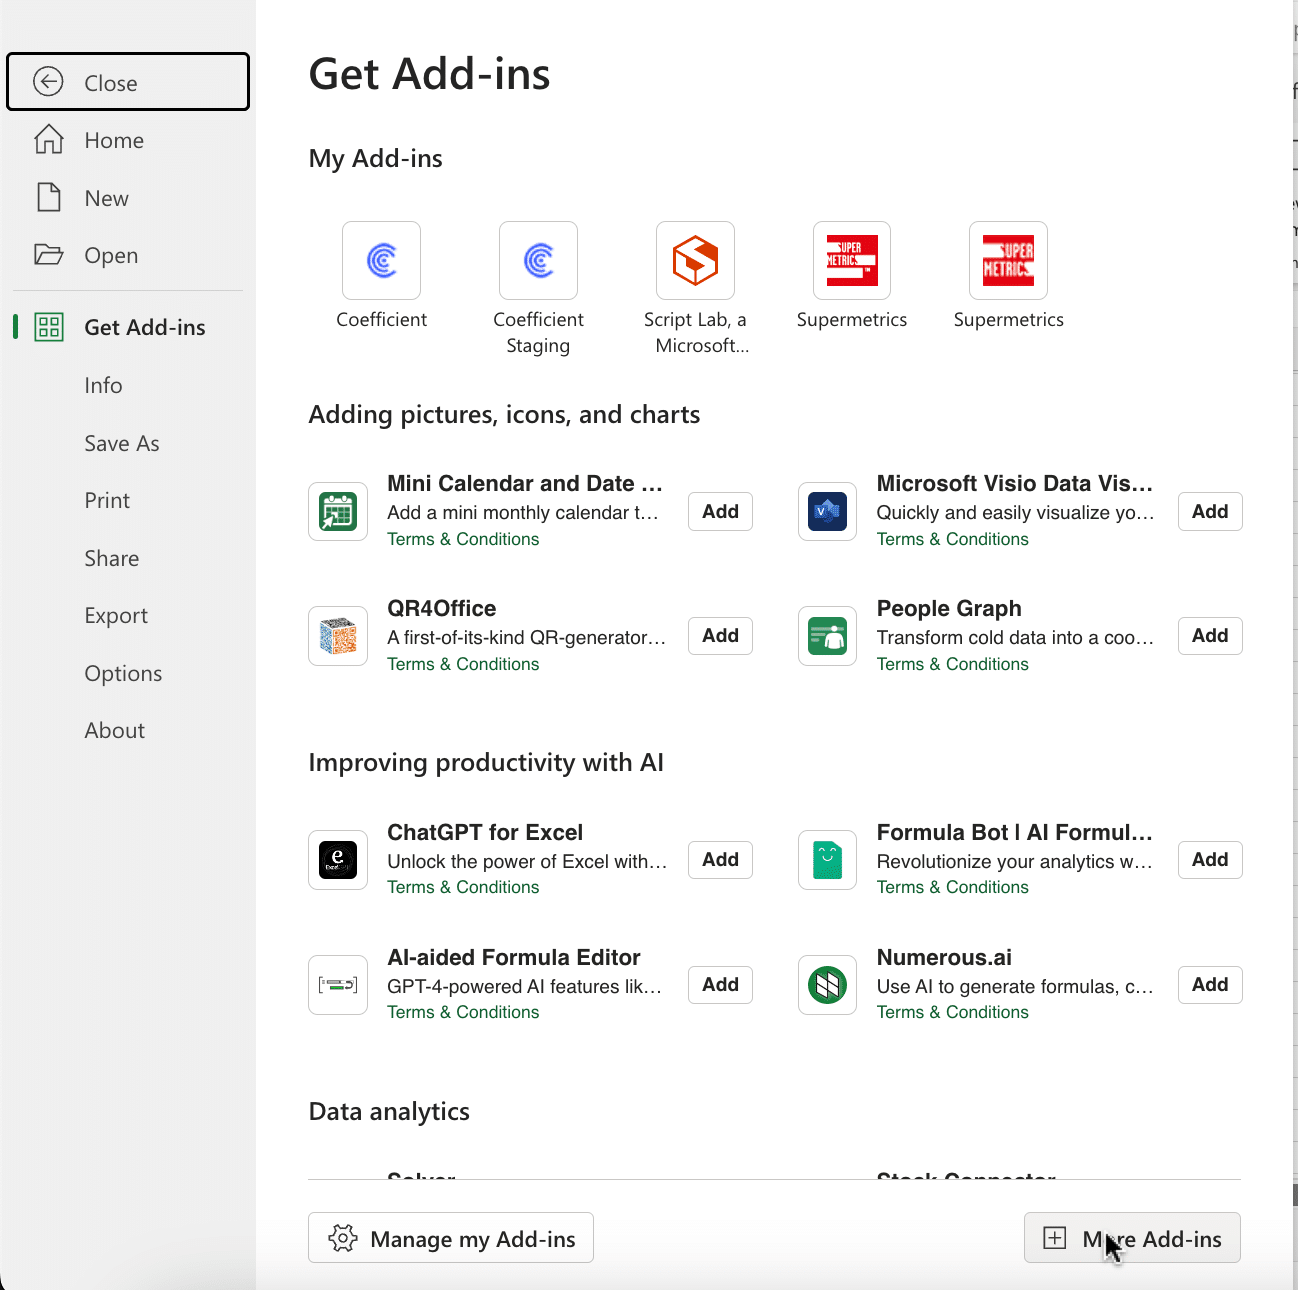 Navigating through Excel's File menu to access the Get Add-ins feature.